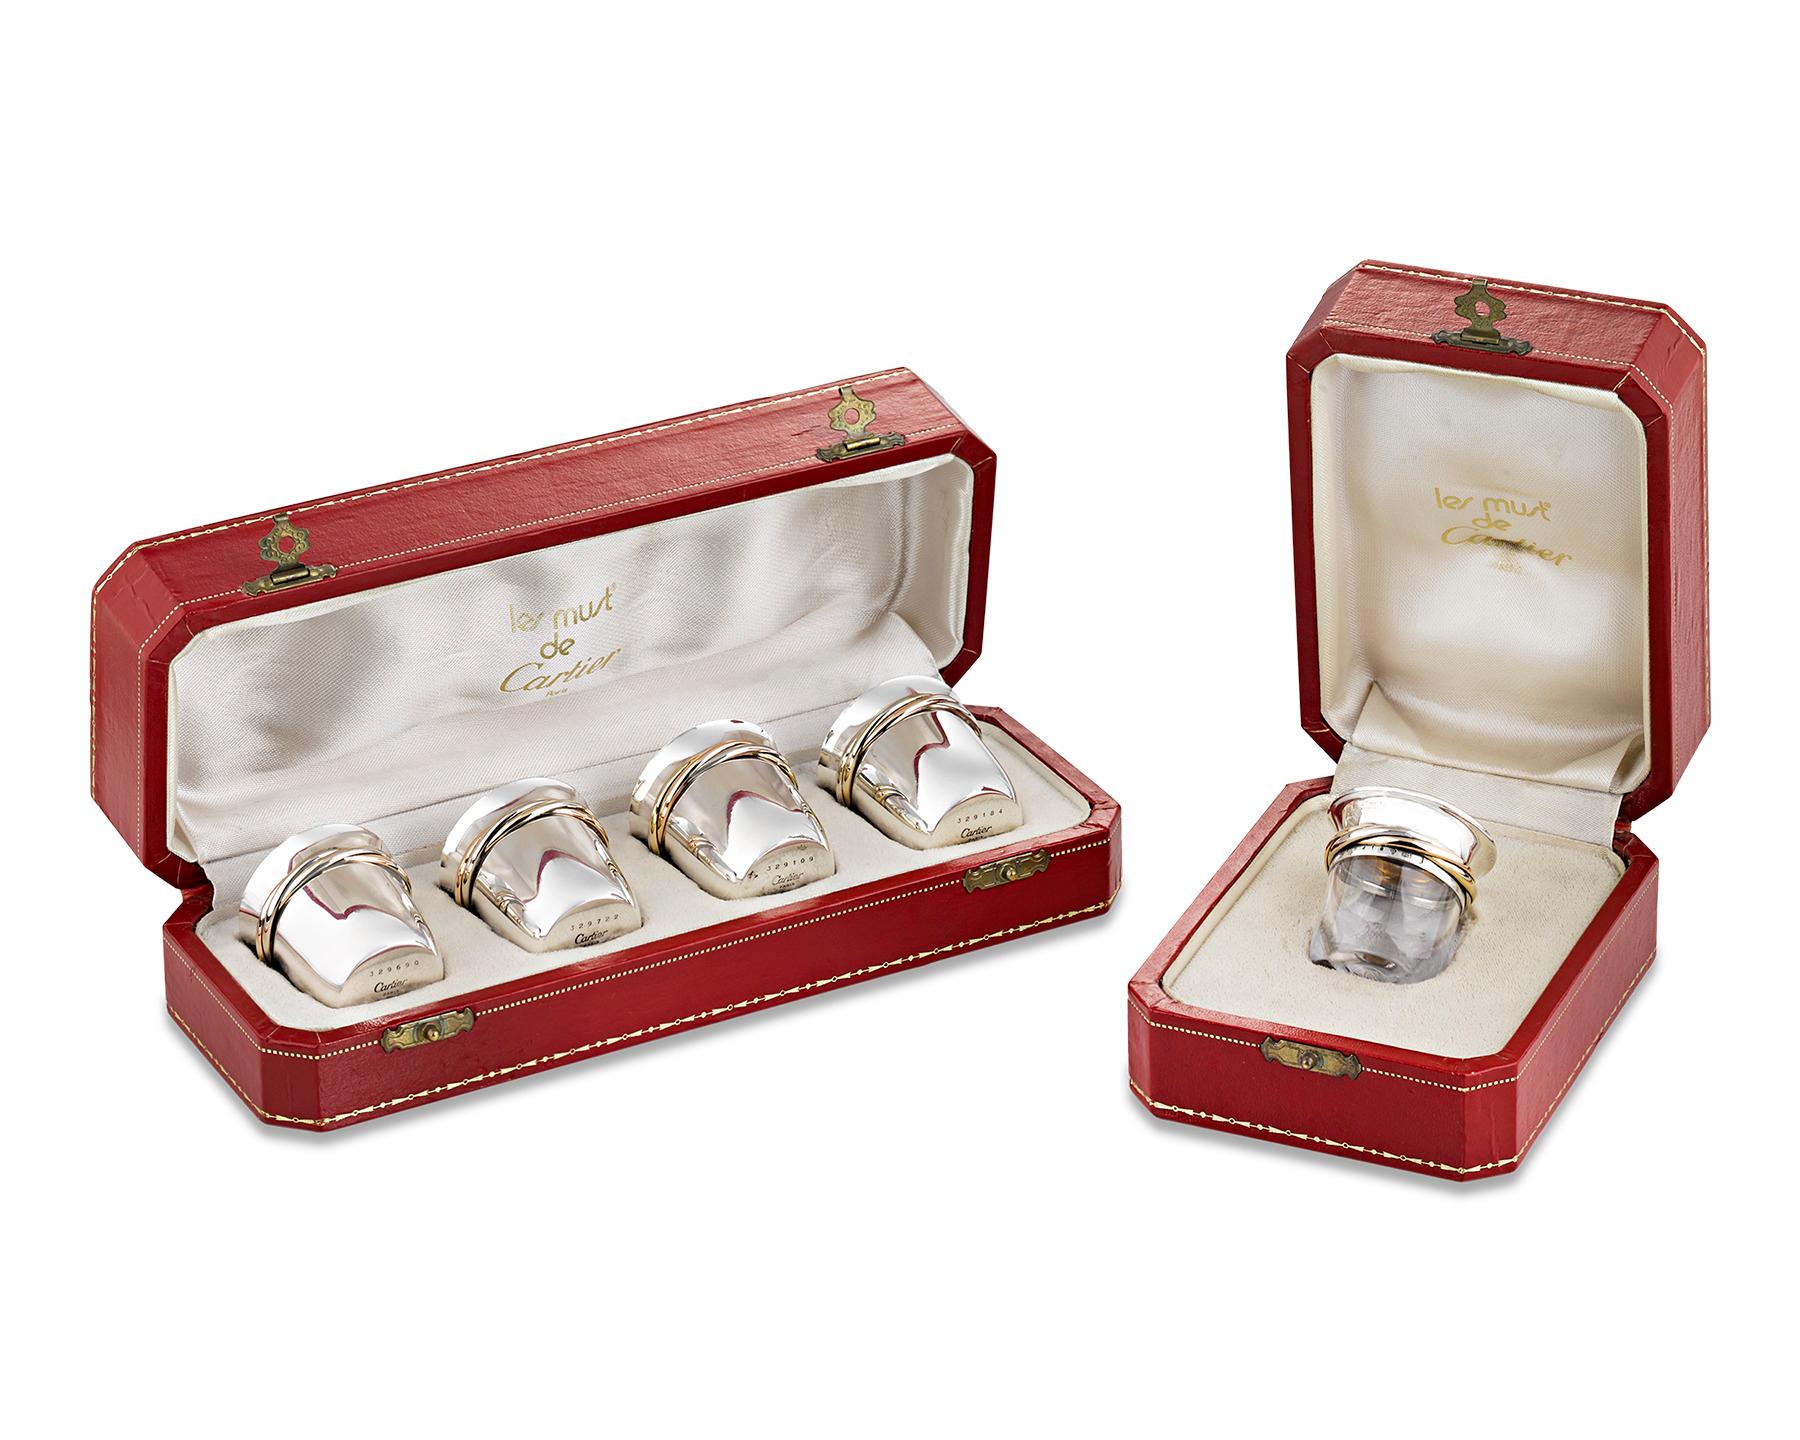 This sterling silver tequila set by Cartier boasts a sleek and stylish design. A striking twist of silver and gold gilt ribbons entwine on the lip of each glass. The streamlined set comprises four sterling silver shot glasses and one glass salt